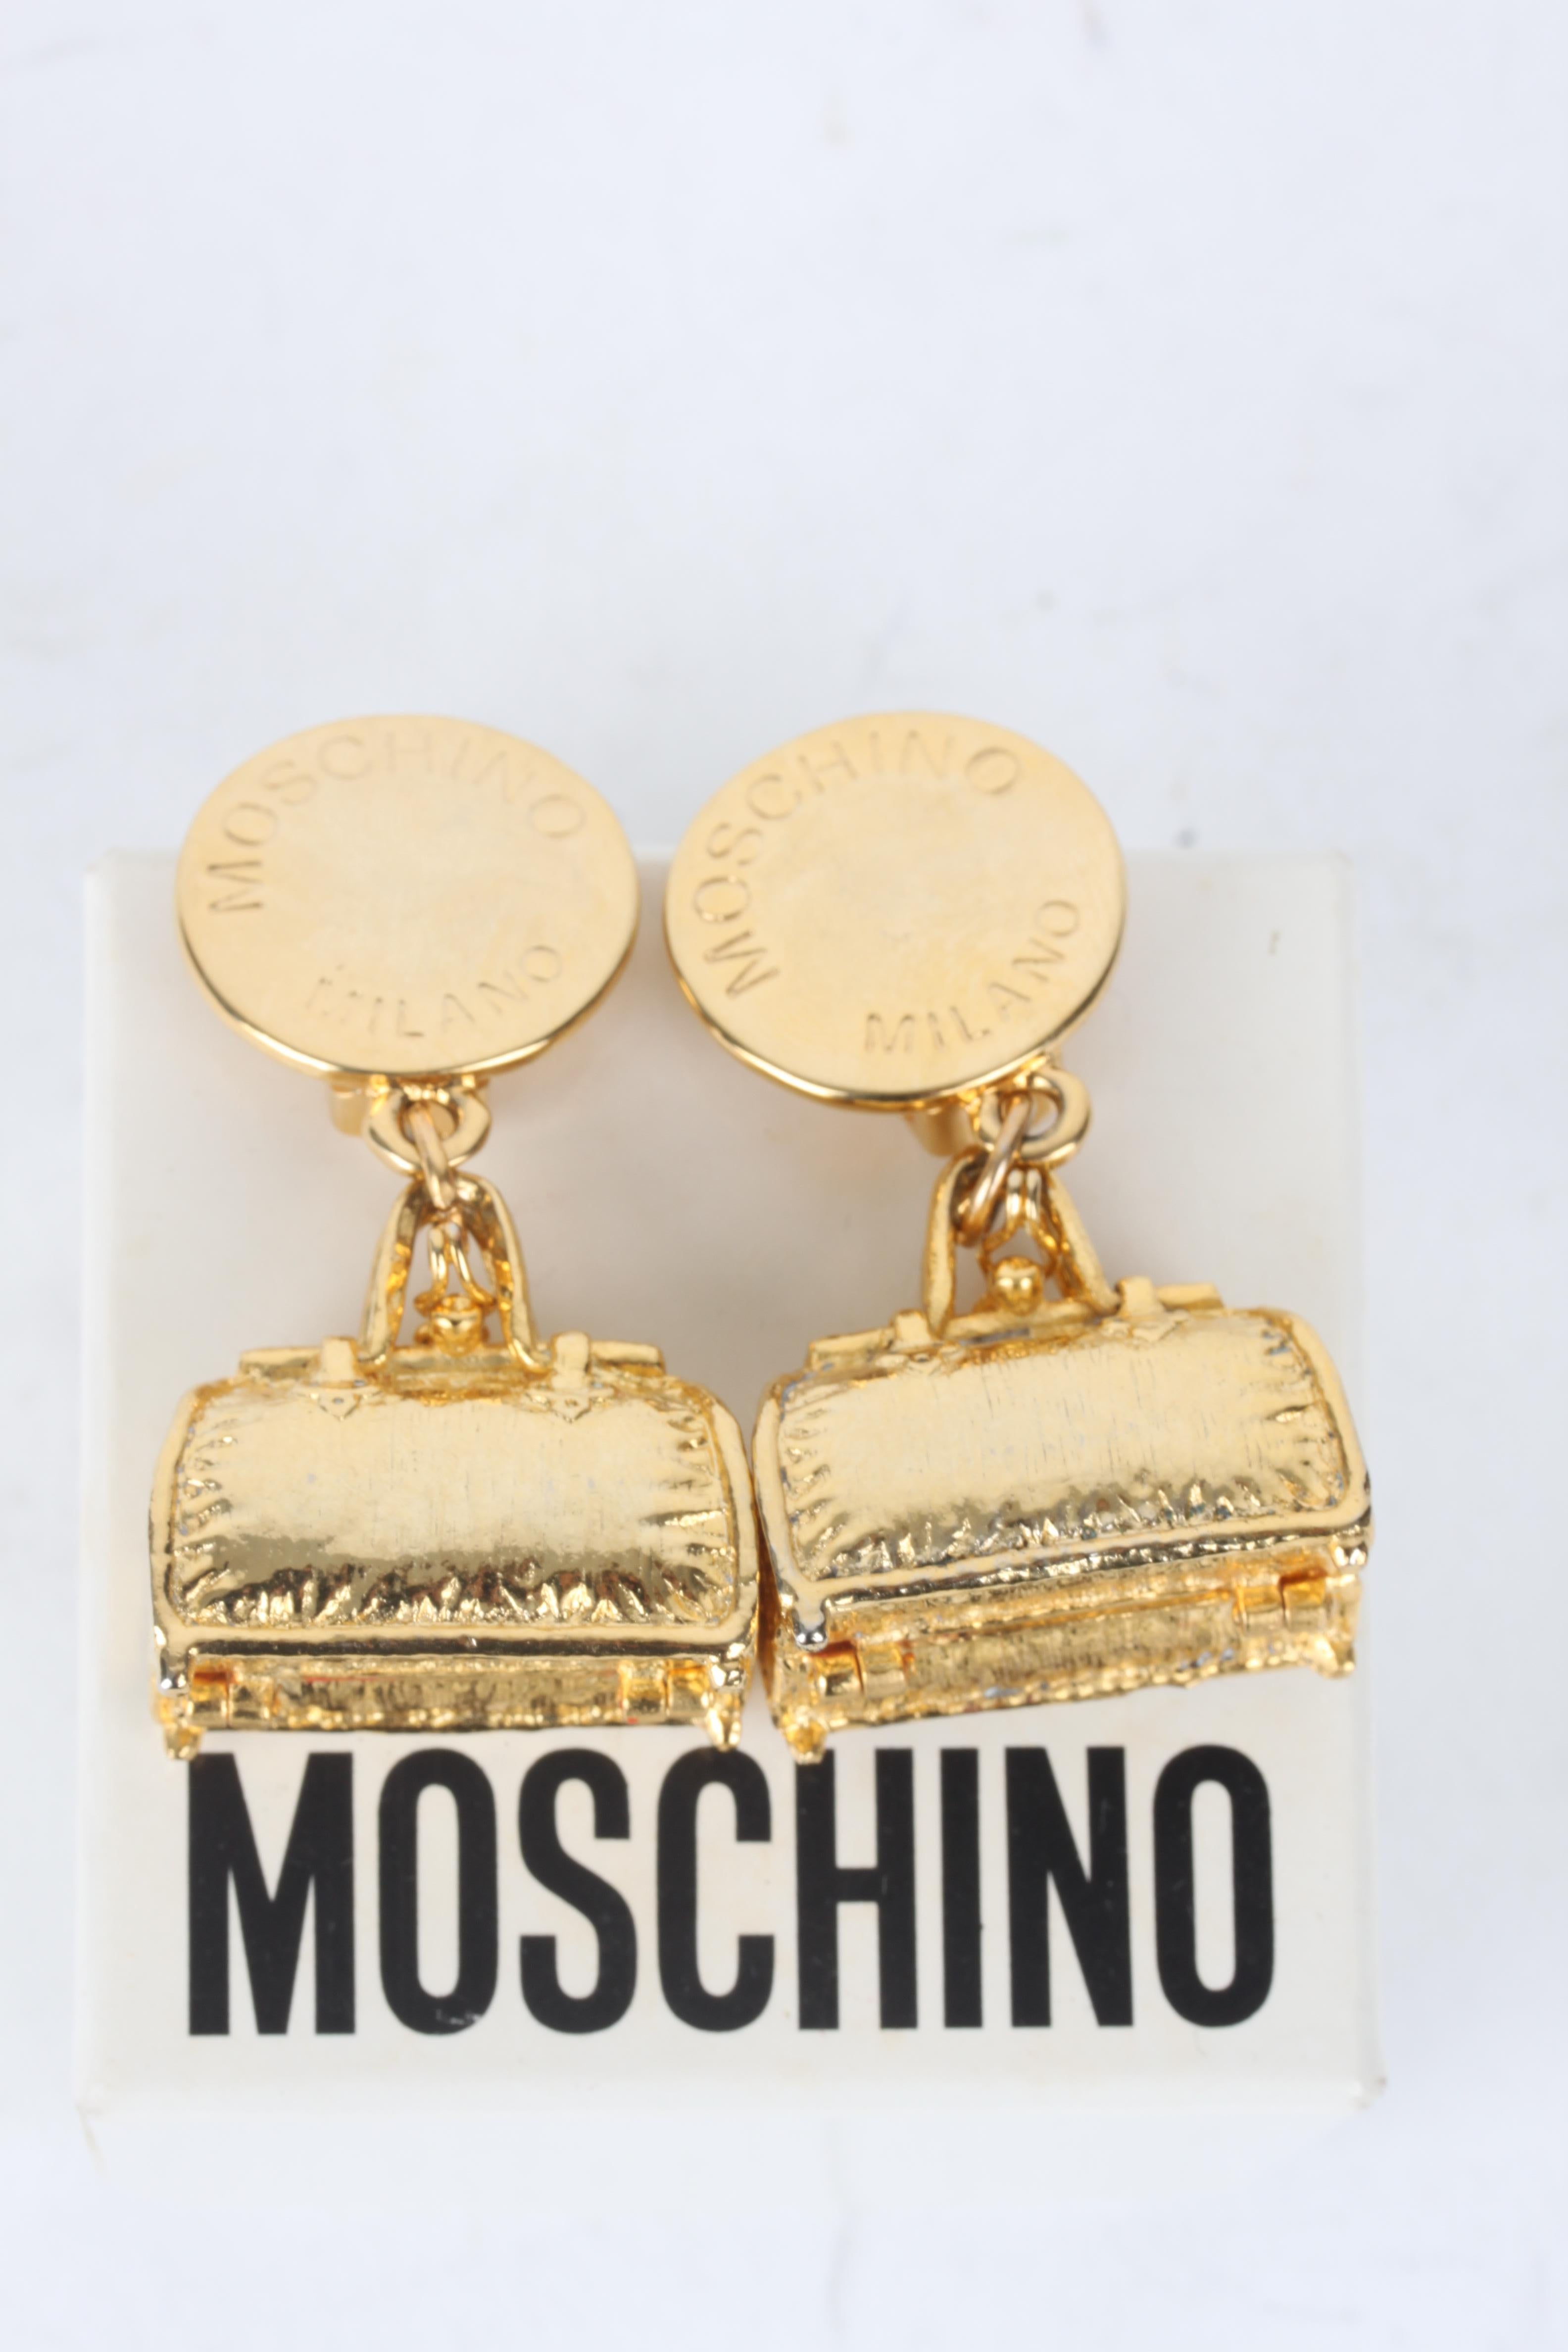 Moschino Gold-Plated Bag Charm Clip-On Earrings.

These earrings feature a lux gold-plated bag-charm exterior with a matching glossy finish. The earrings feature a gold-plated backside clip fastening. Bag charm opens up to a red velvet interior. The